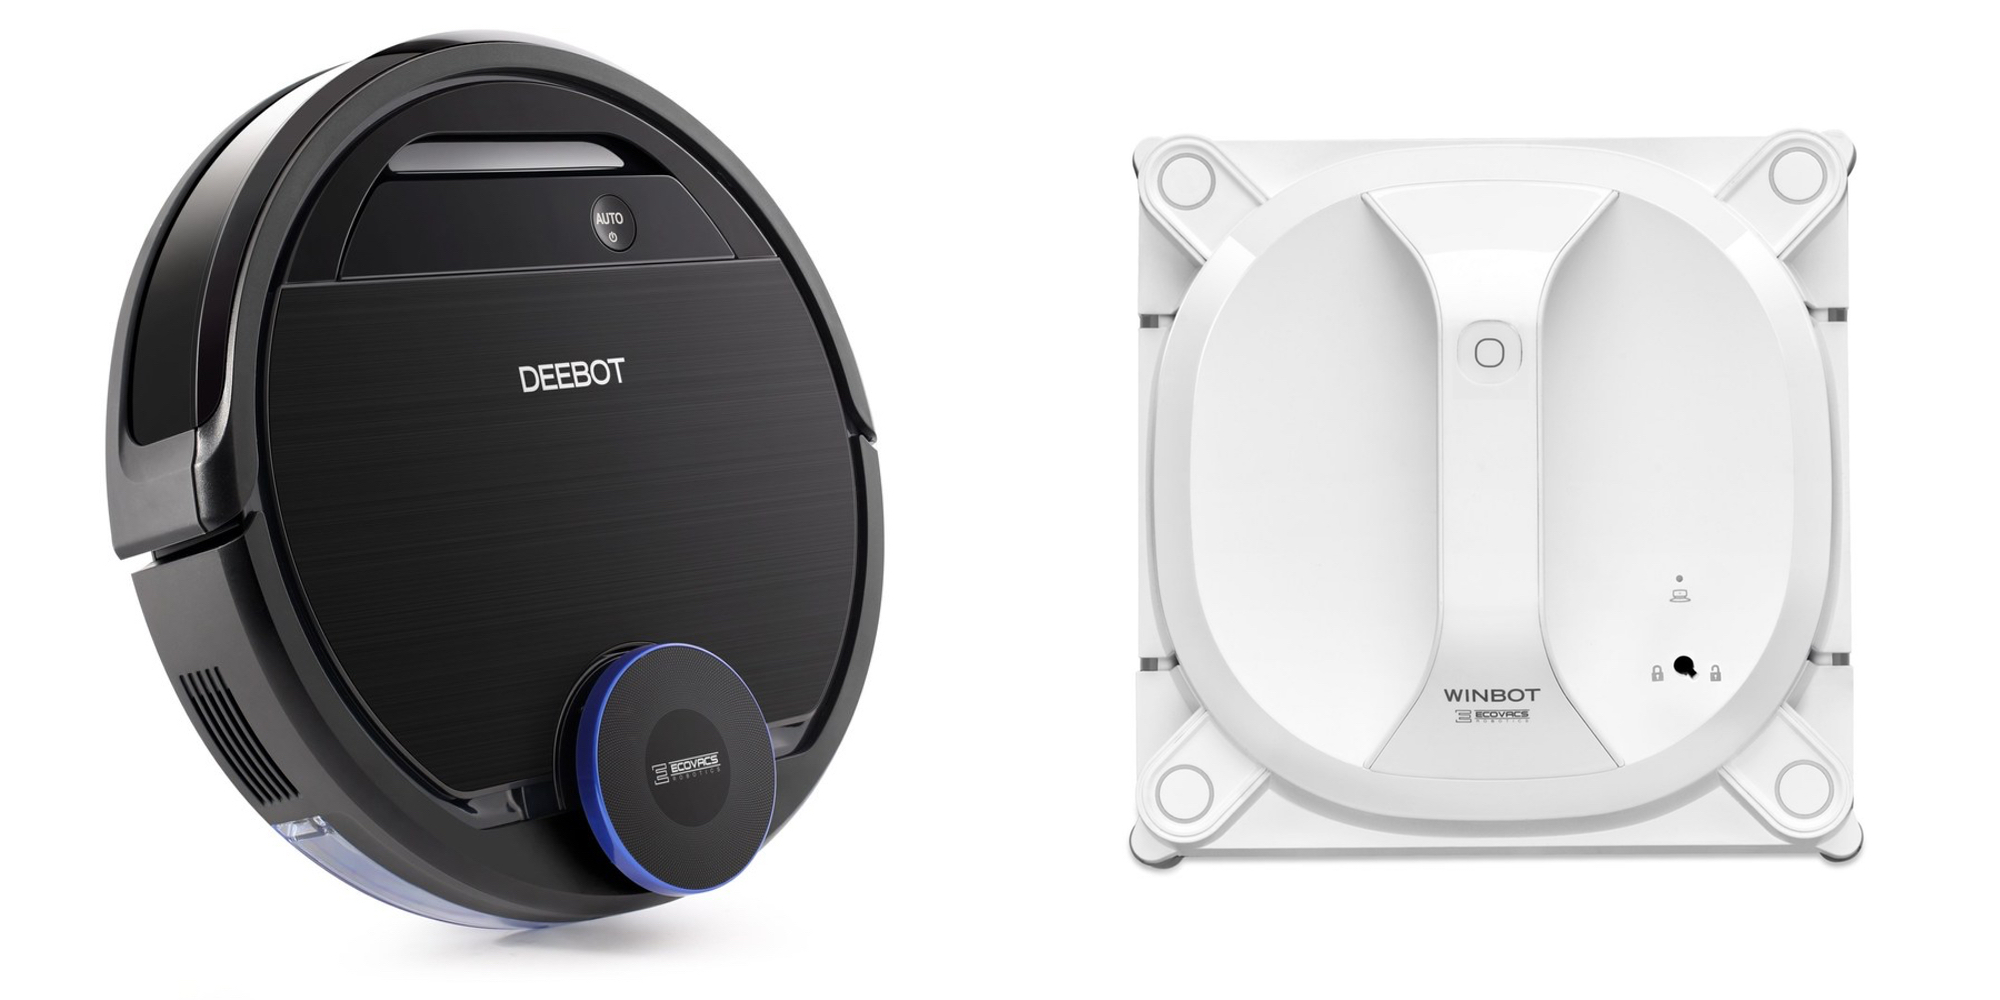 ECOVACS brings voice control, laser scan mapping, more to new robotic cleaners at CES